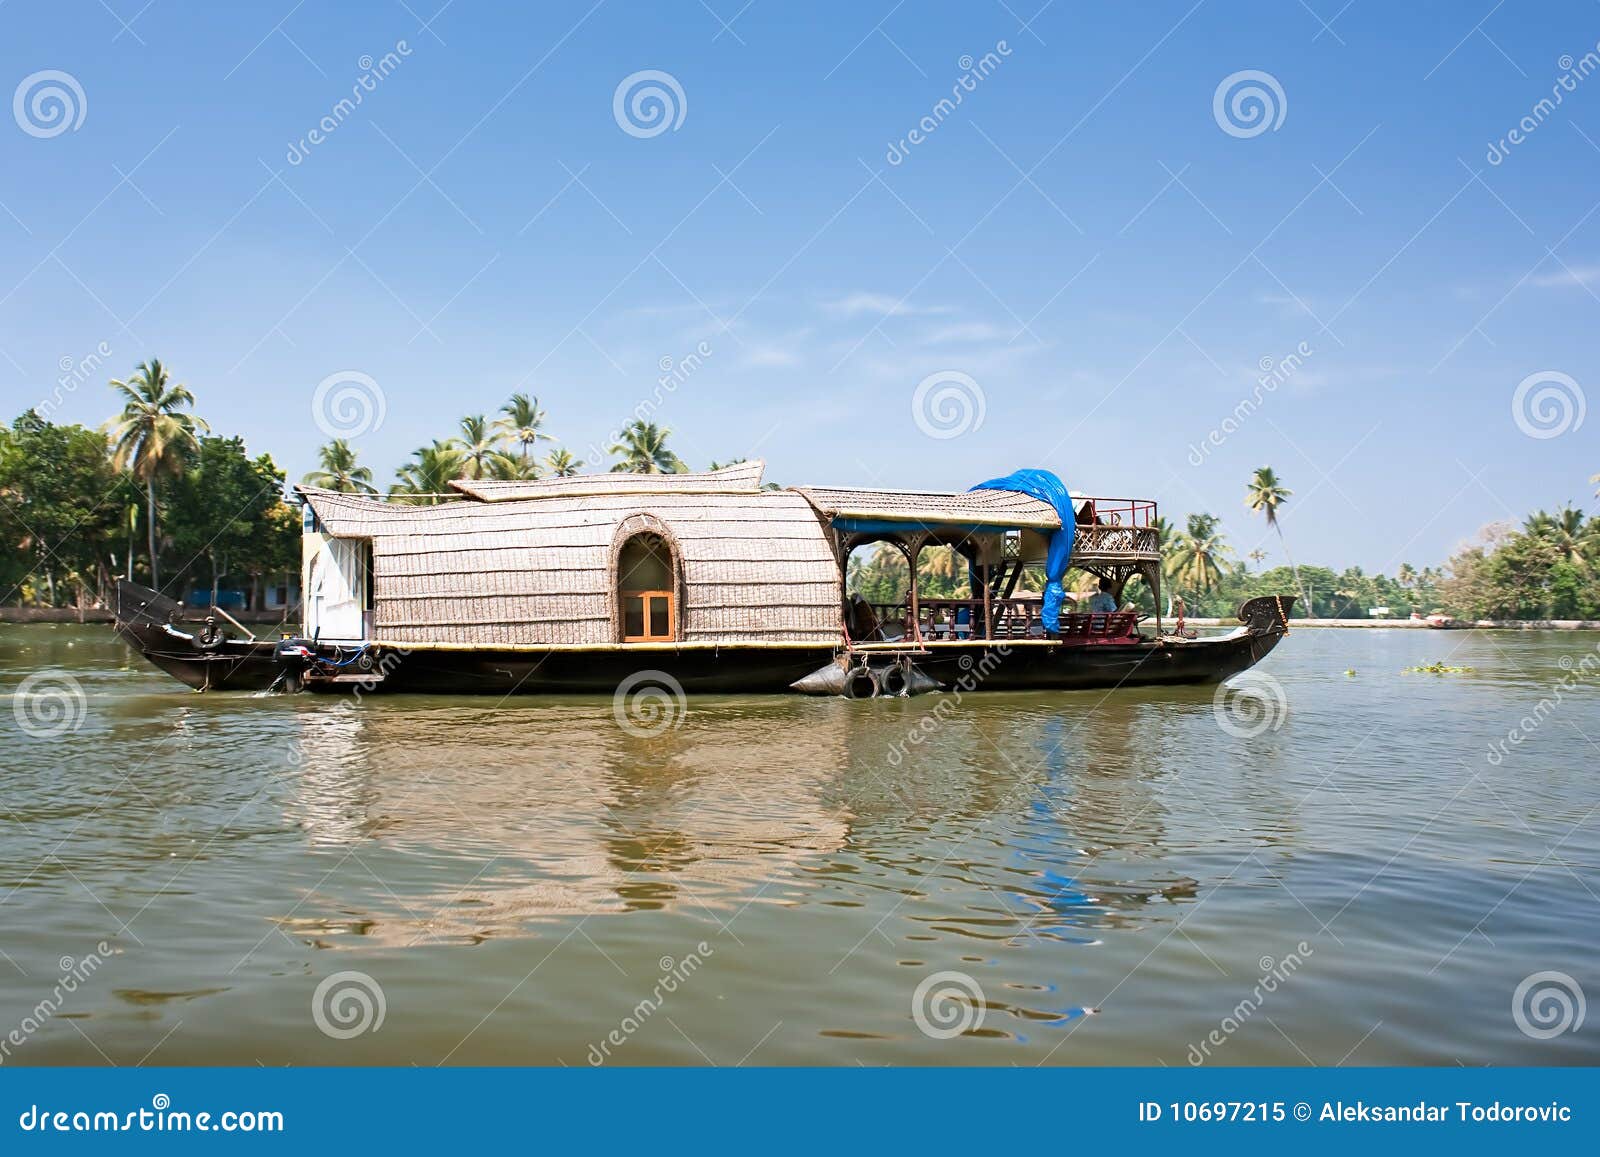 houseboat clipart - photo #26